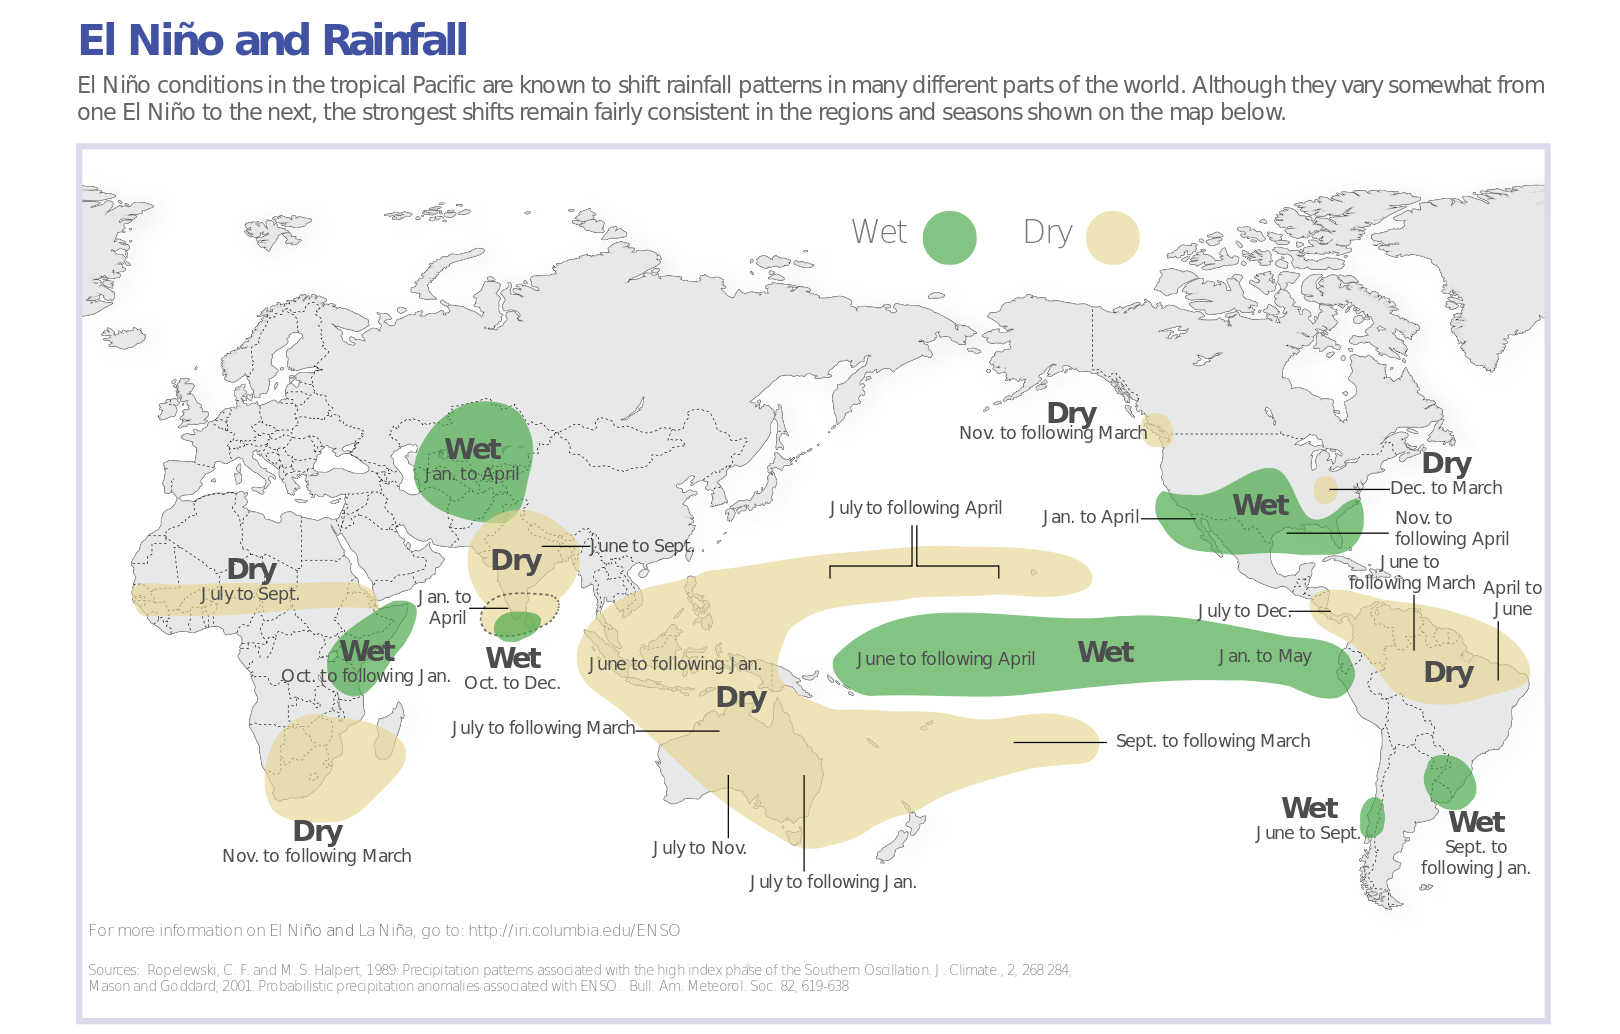 Typical rainfall patterns during El Niño events. Such teleconnections are likely during El Niño events, but not certain.